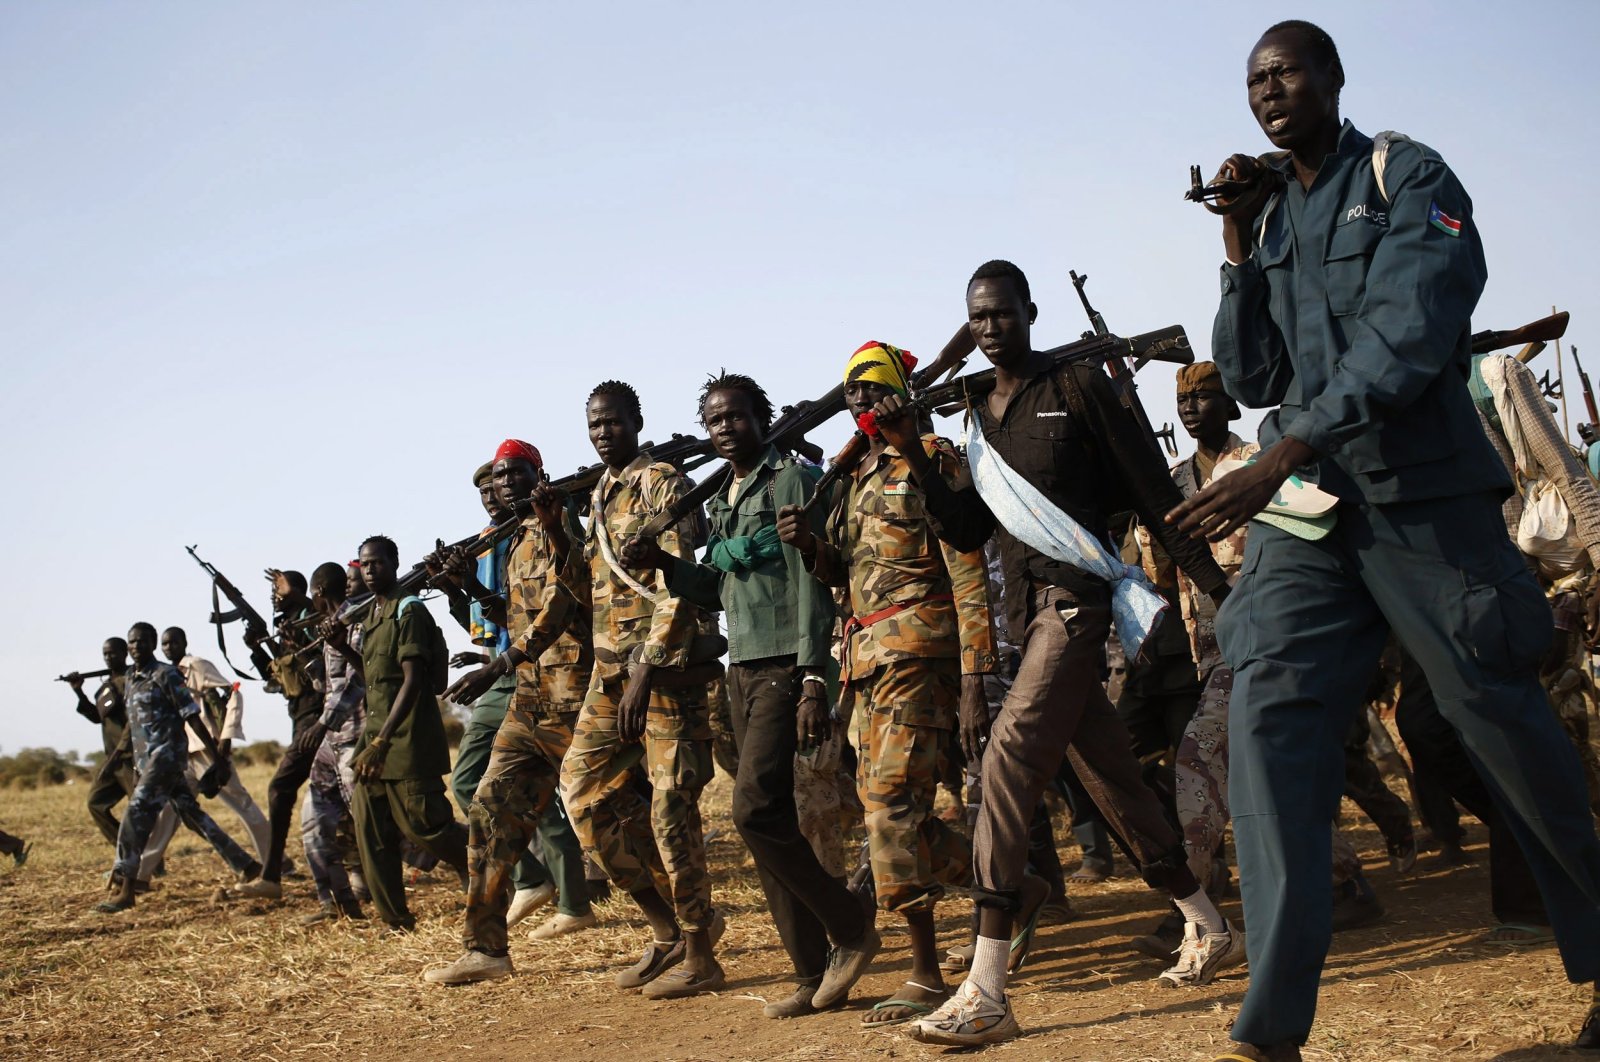 Jikany Nuer White Army fighters, a local youth militia affiliated with the rebels, walk in Upper Nile State, South Sudan, Feb. 12, 2014. (Reuters Photo)